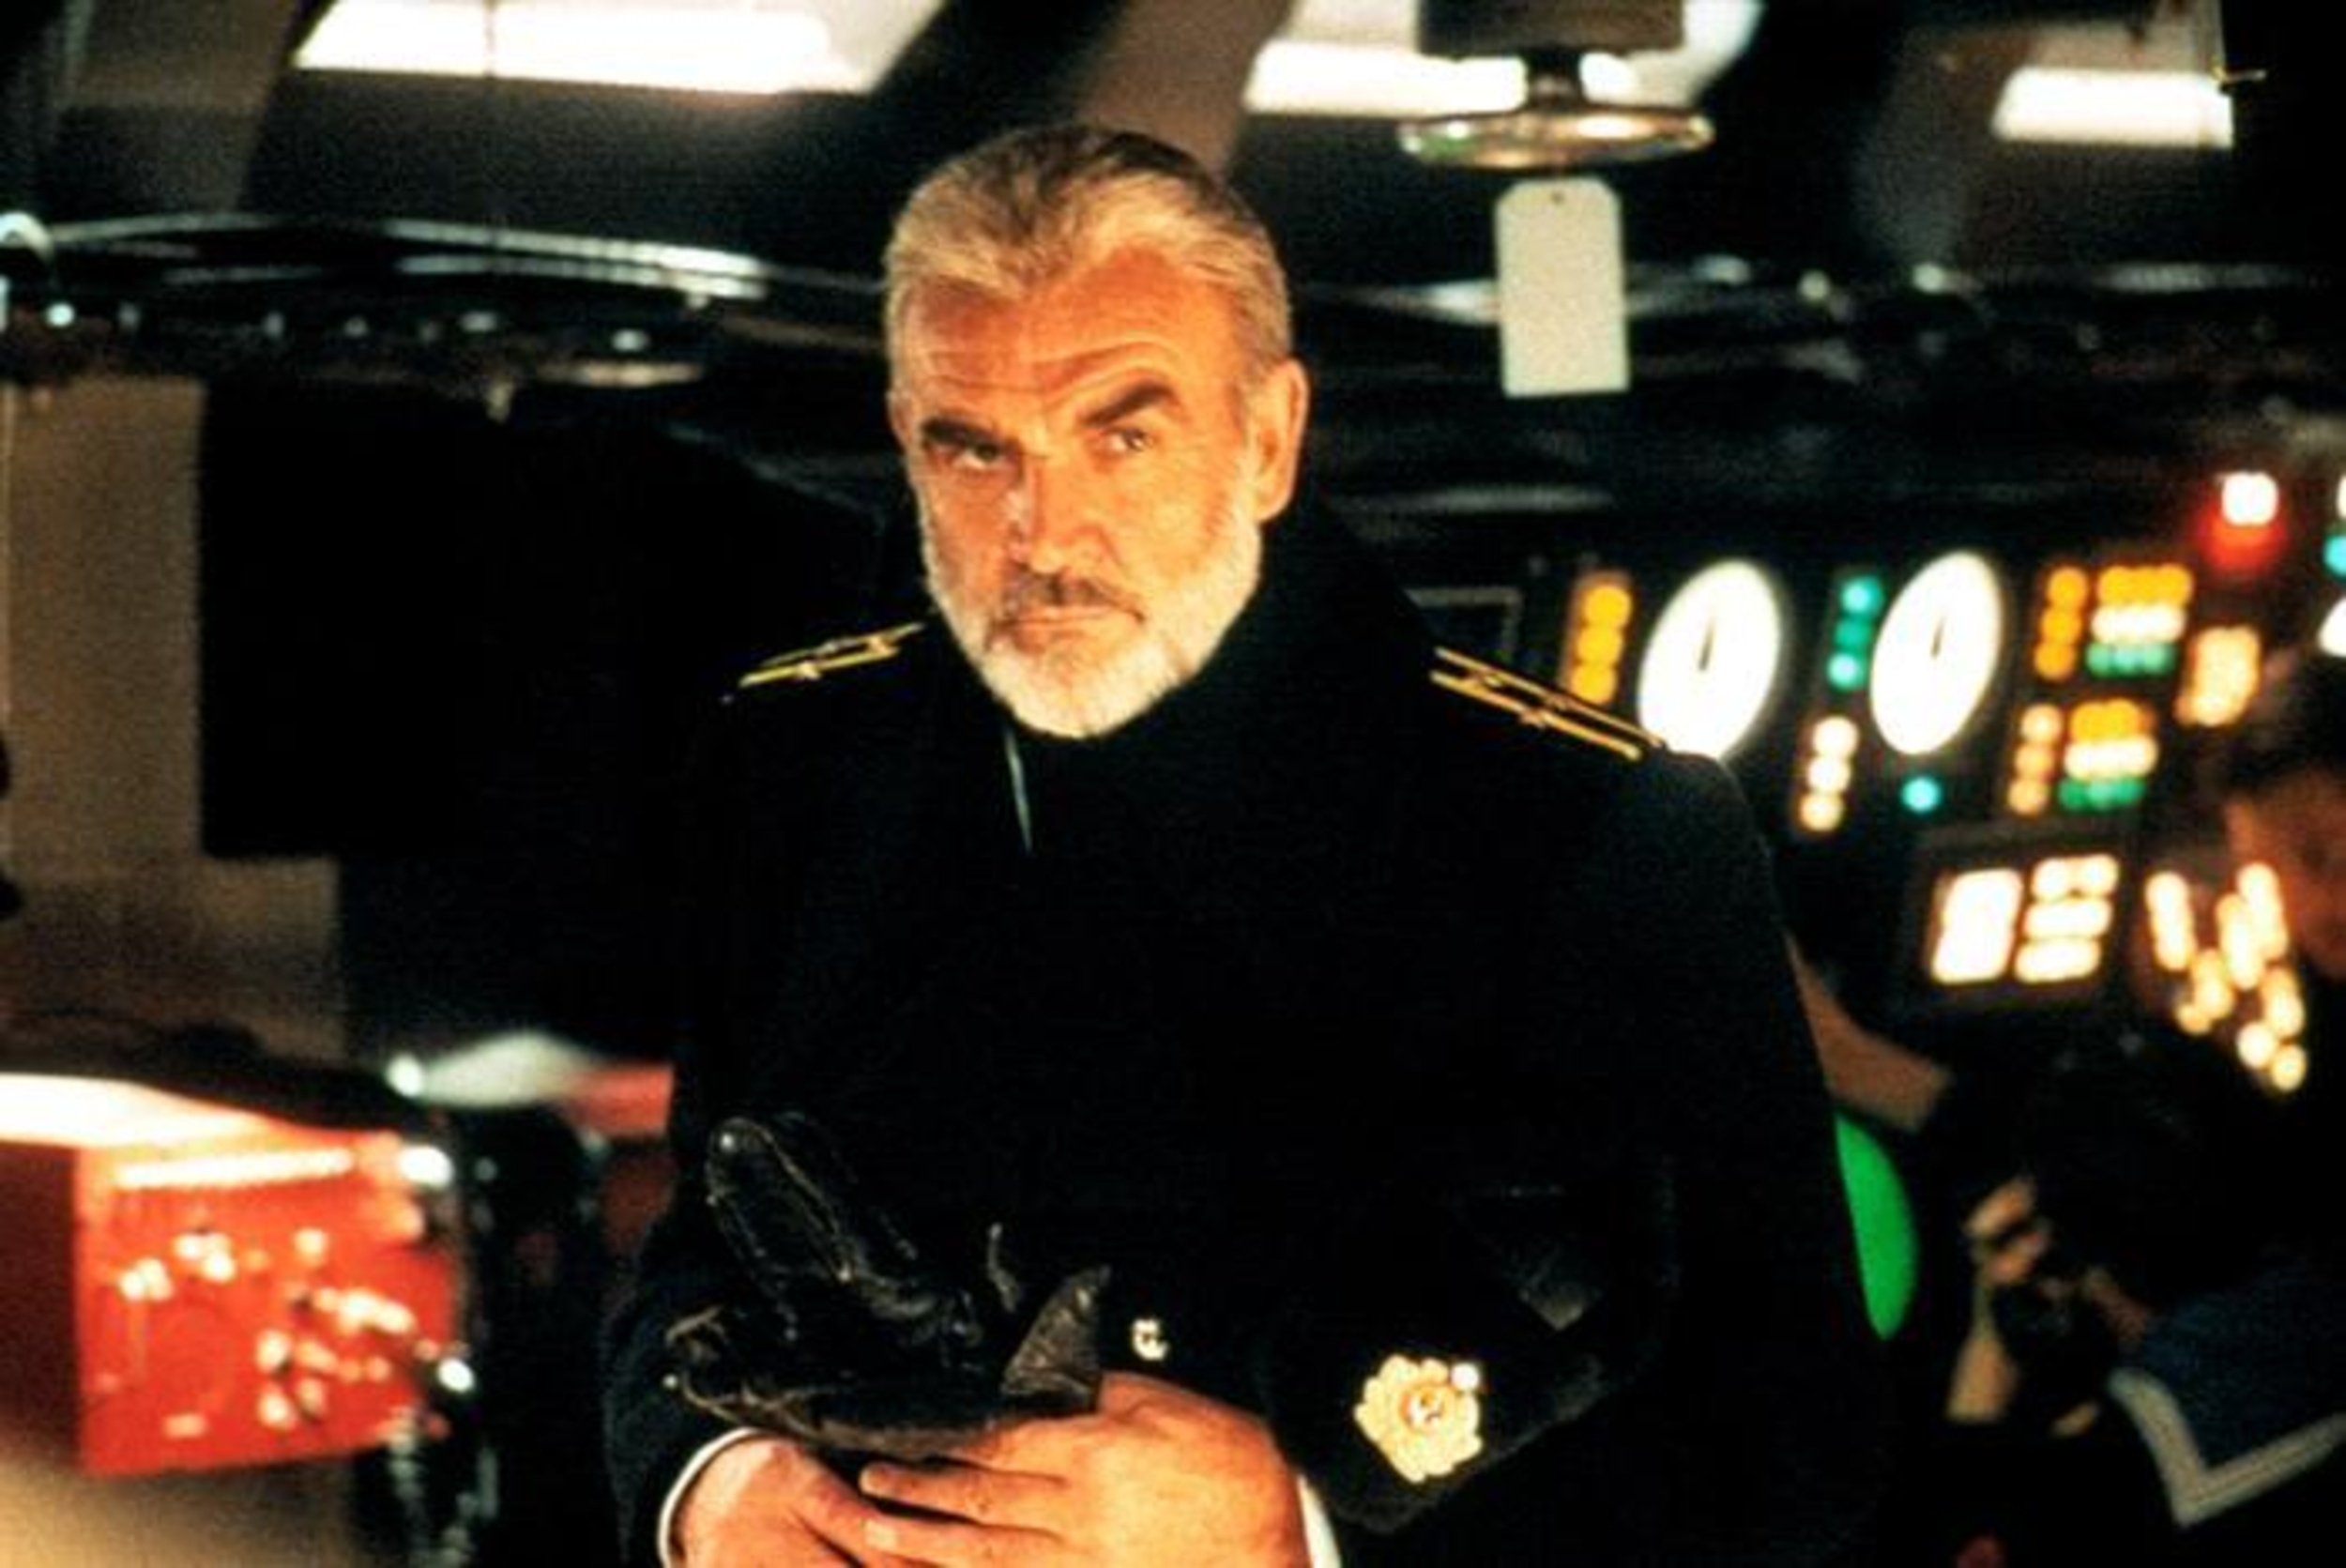 <p>When Connery showed up to shoot, he was wearing a hairpiece that had a ponytail element. Connery was a fan and wanted to wear it for the movie, but he was pretty much the only one. McTiernan hated it, and Connery started to get mocked on set. He agreed to nix the ponytail and go with the hairpiece you see in the movie. McTiernan jokingly called it a “$20,000 hairpiece,” not because of the actual cost of the piece but because the change led to reshoots.</p><p><a href='https://www.msn.com/en-us/community/channel/vid-cj9pqbr0vn9in2b6ddcd8sfgpfq6x6utp44fssrv6mc2gtybw0us'>Follow us on MSN to see more of our exclusive entertainment content.</a></p>